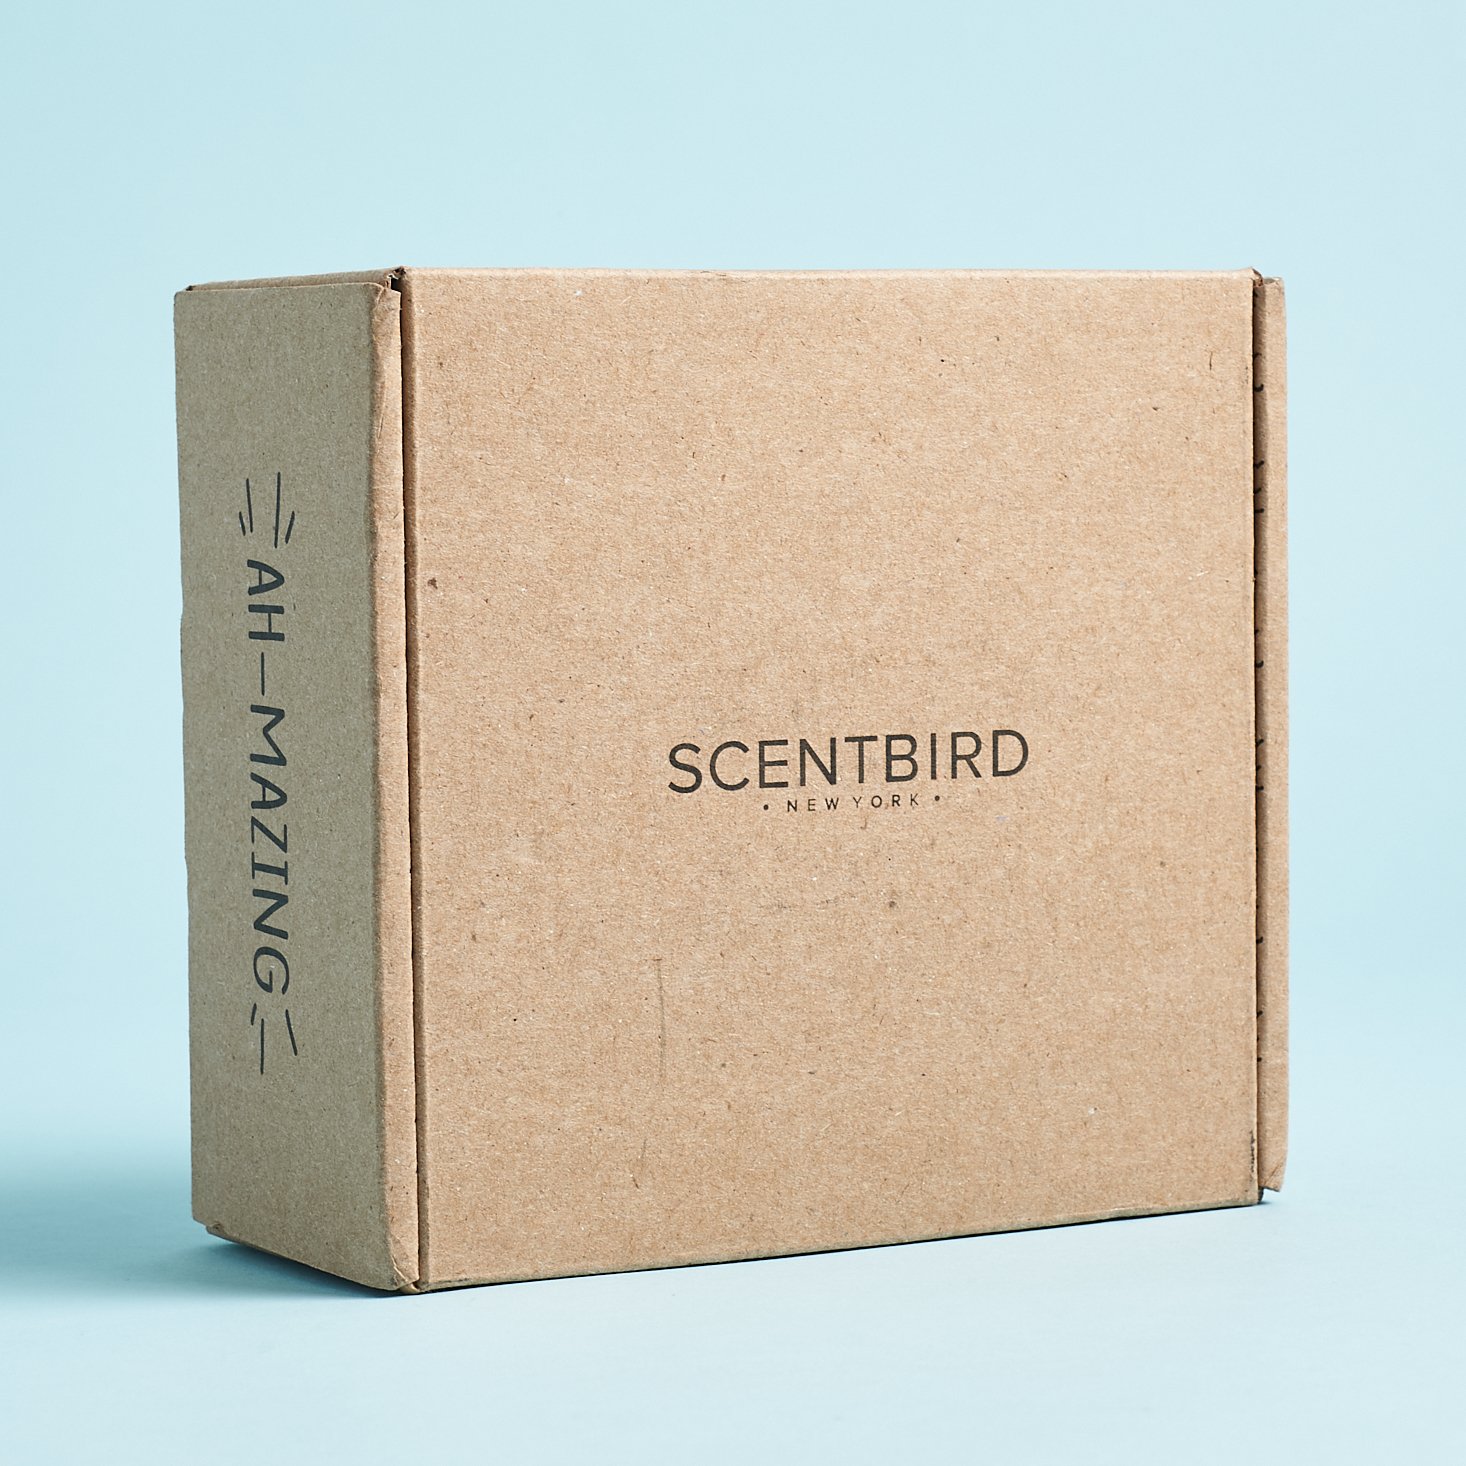 Scentbird Coupon – 25% Off Your First Box